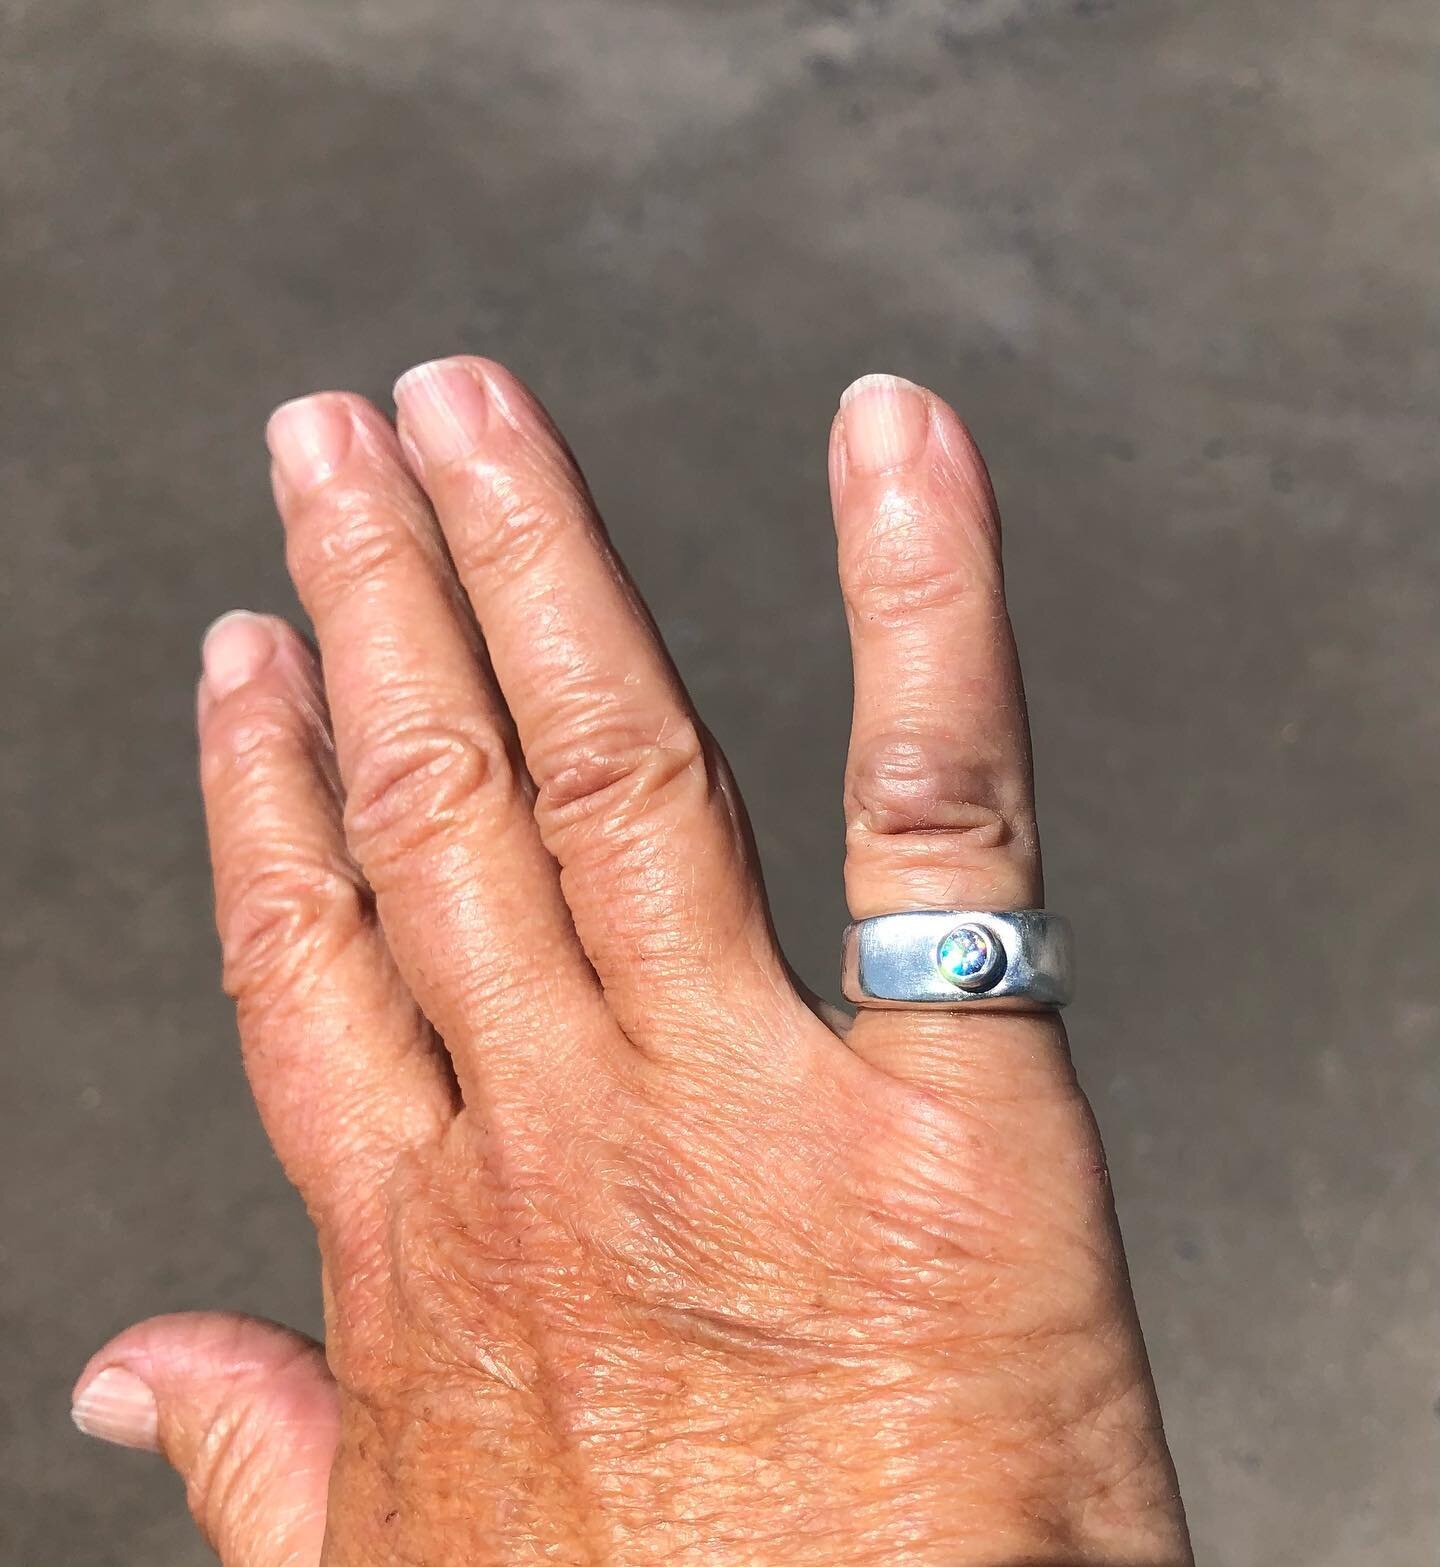 Made a ring for my flawed-knuckle finger. Brushed sterling silver with collet set Swarovski zirconia. Made entirely by hand. The ring has no straight lines and is imperfect. Much like me. #silversmith #artisanjewelry